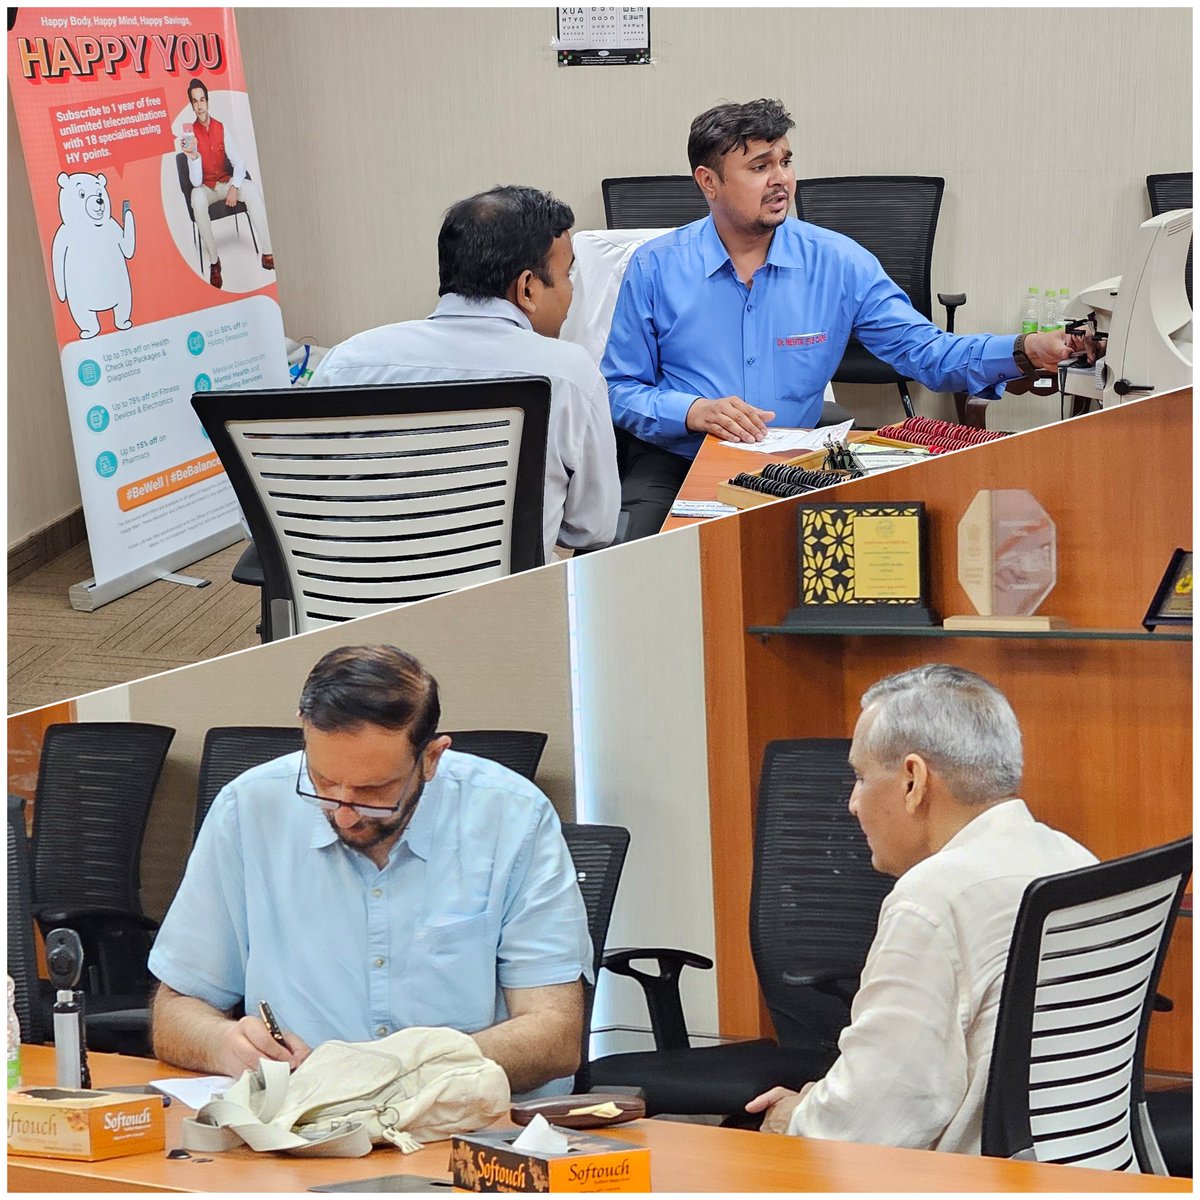 🌟Excited to have partnered with Kotak Mahindra Bank for a 2-day health camp at LPAI HQ! Included comprehensive Happy You check-ups, Clove dental screenings, and HOMOEO AMIGO homeopathy treatments. Promoting wellness one step at a time! #HealthCamp 👨‍⚕️🩺 #wellness @KotakBankLtd